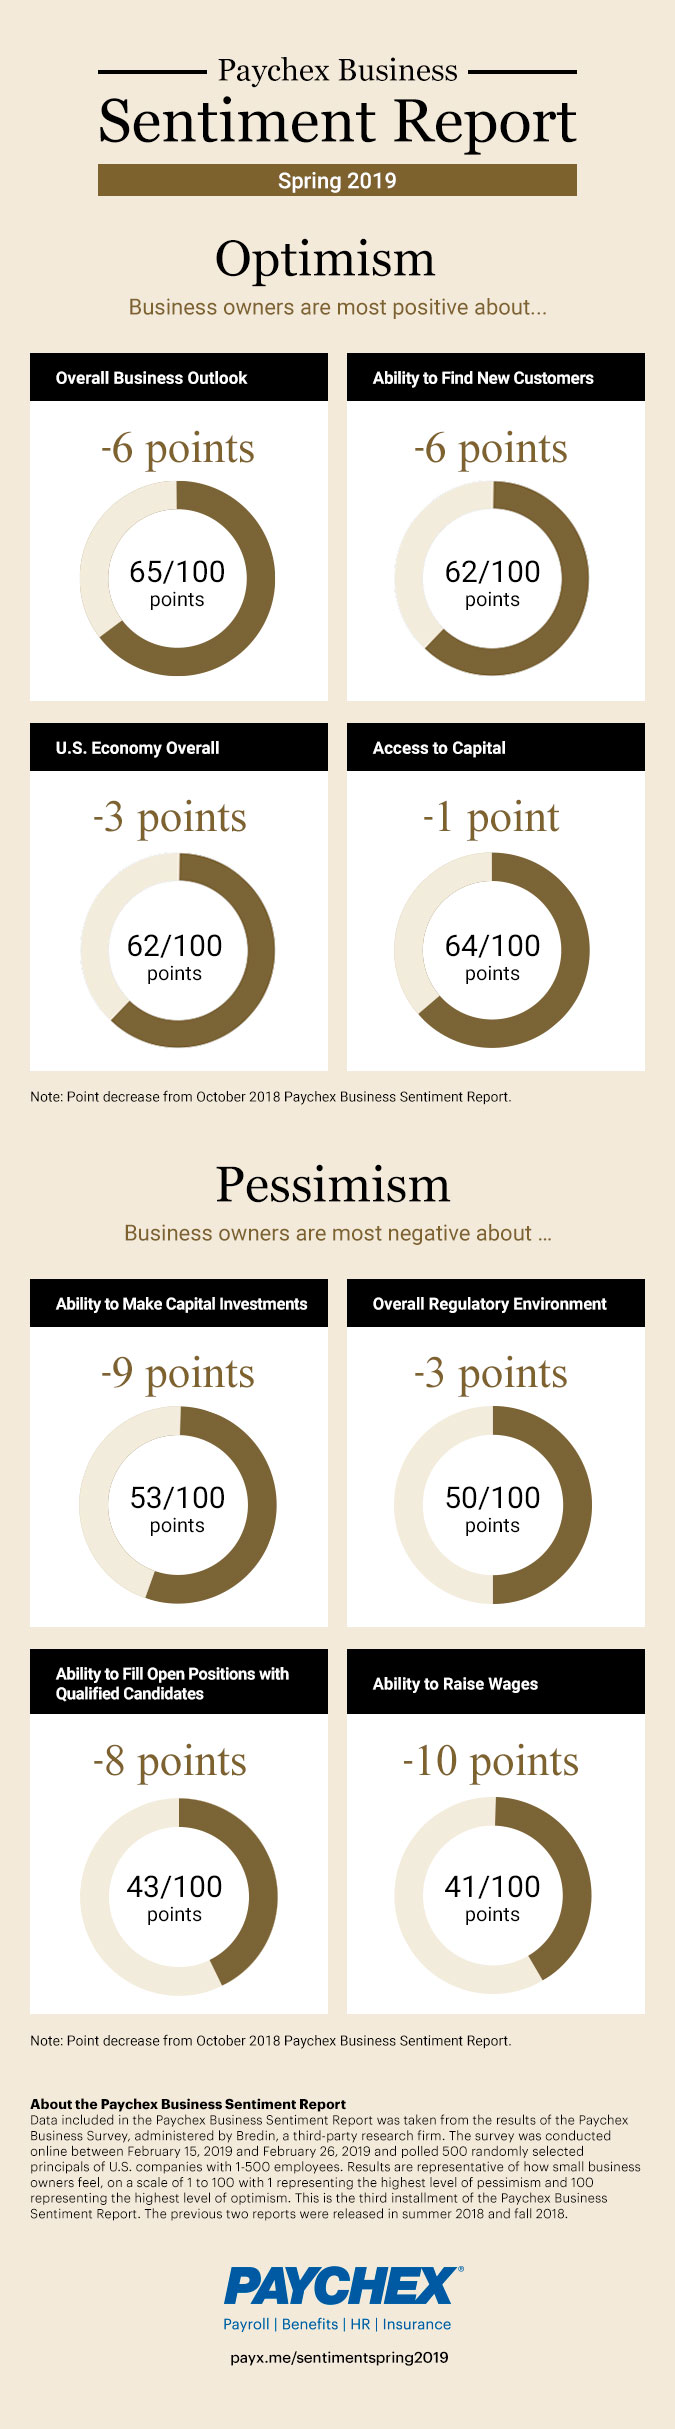 infographic showing business owner sentiment about different aspects of business